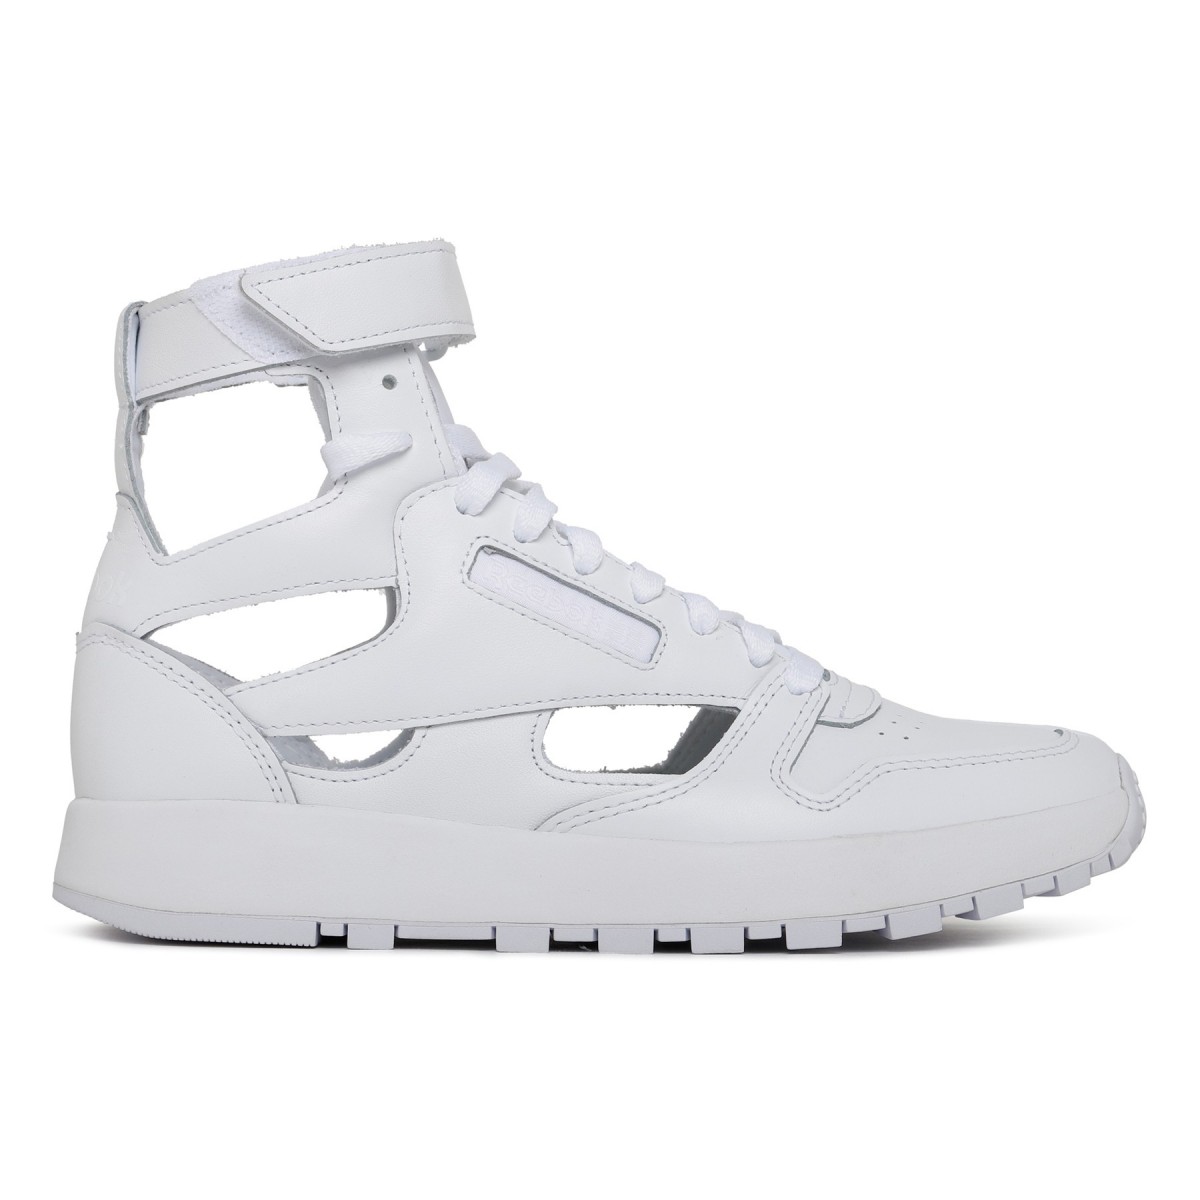 White leather Tabi high-top sneakers